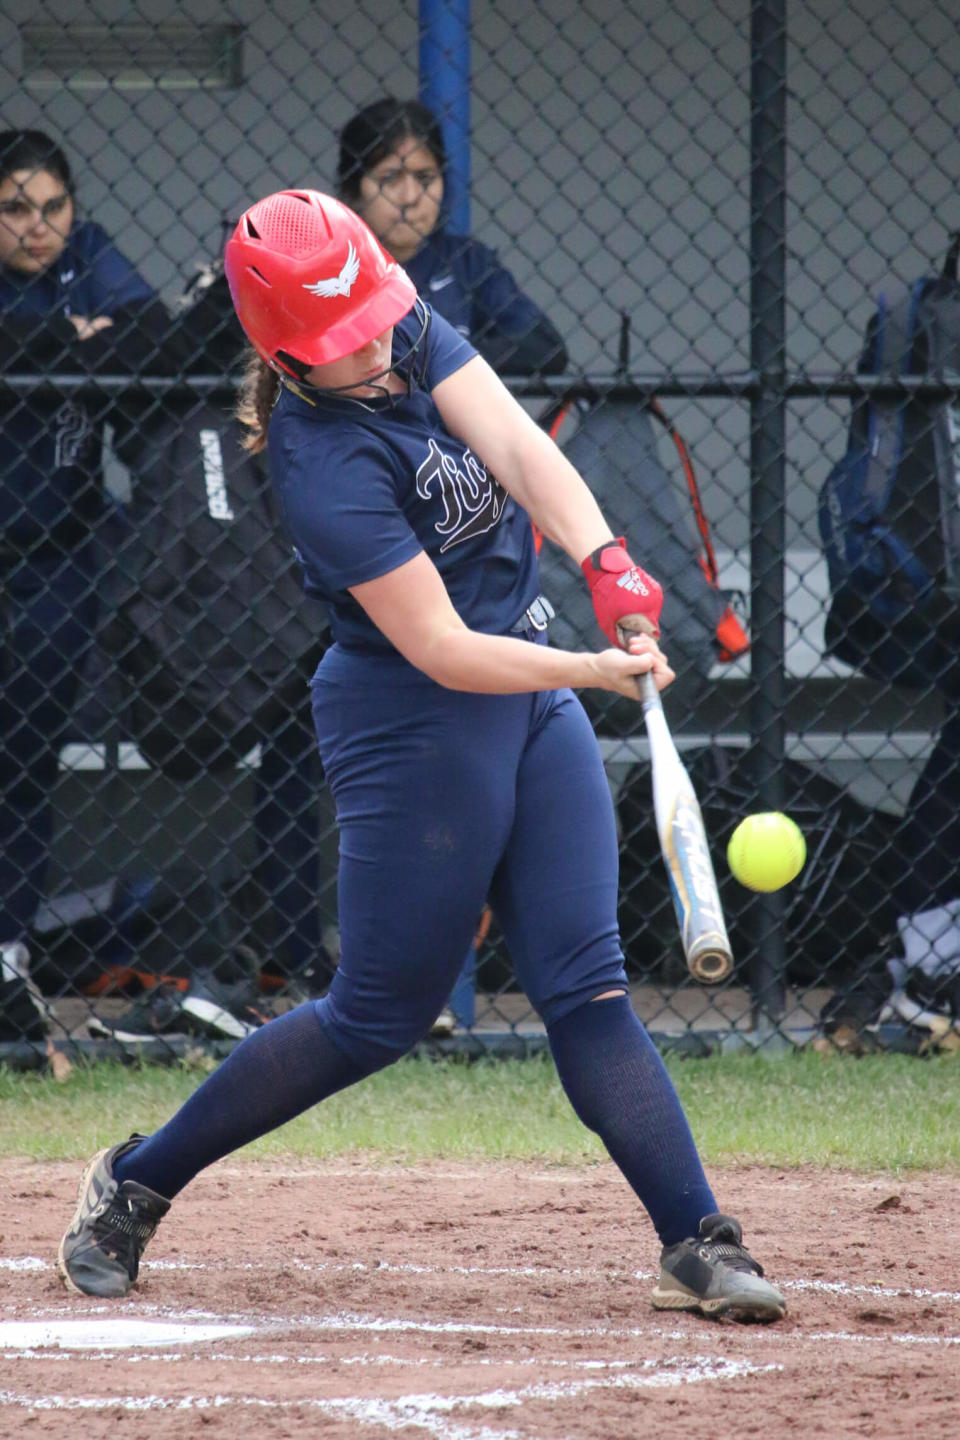 Haldane sophomore Callie Sniffen got her opportunity to play varsity softball in a merger with Putnam Valley this season. With the help of teammates and friends, she makes the 30-minute one-way drive to practice each day.